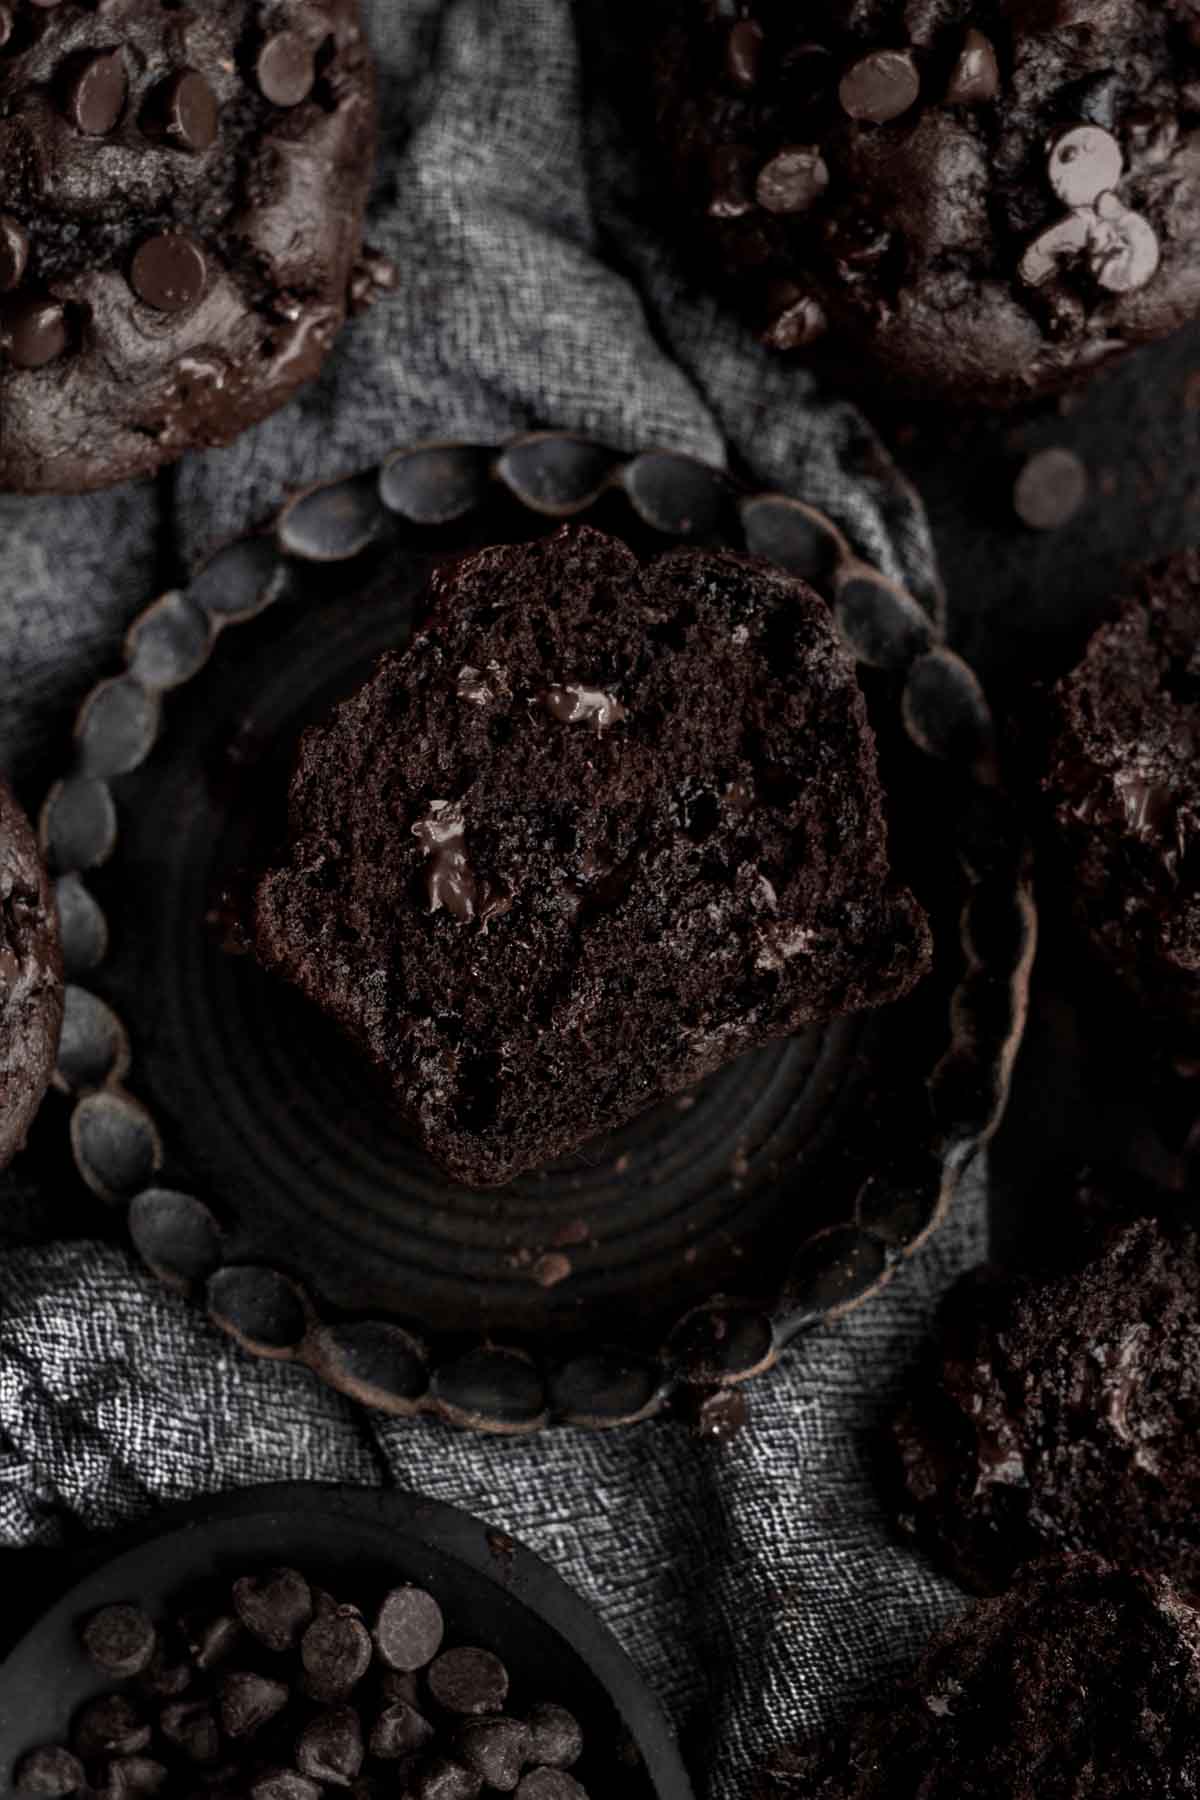 Looking down at a Gluten Free Chocolate Muffin.